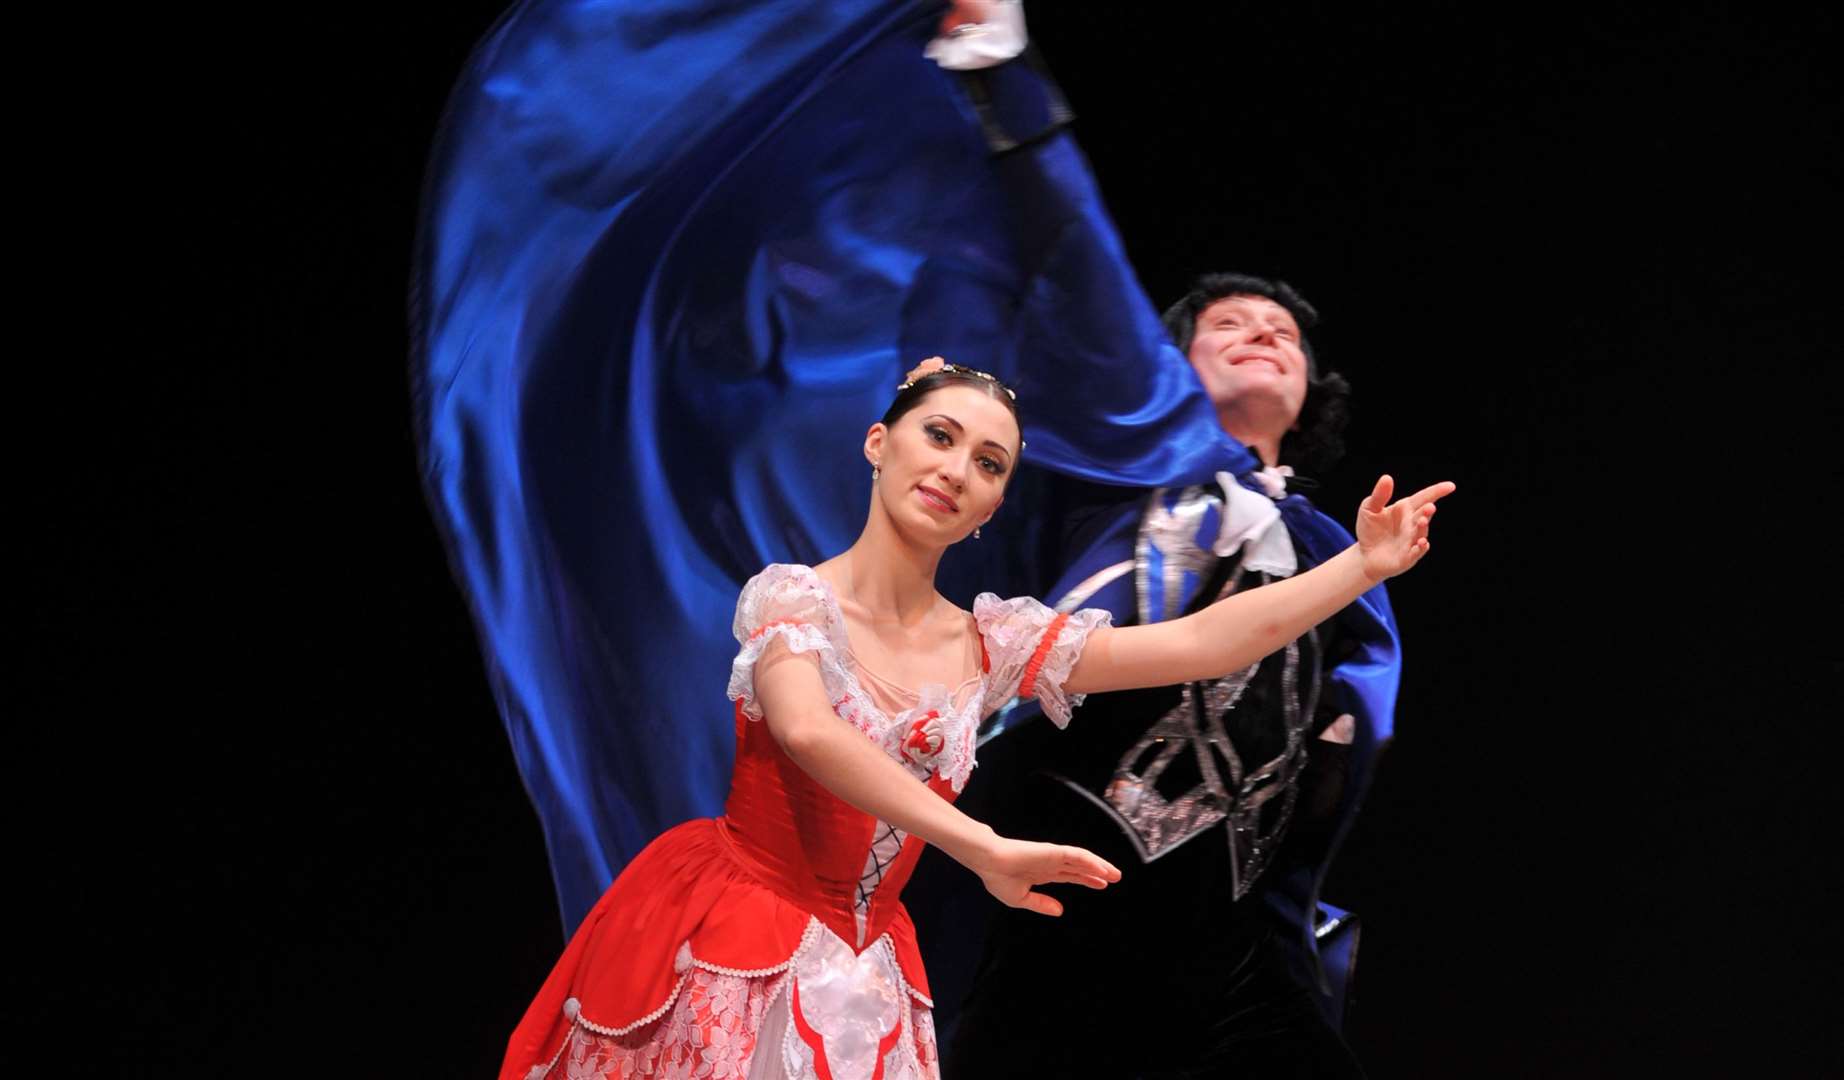 Acclaimed dancers from The Russian State Ballet of Siberia will soon grace The Marlowe Theatre.